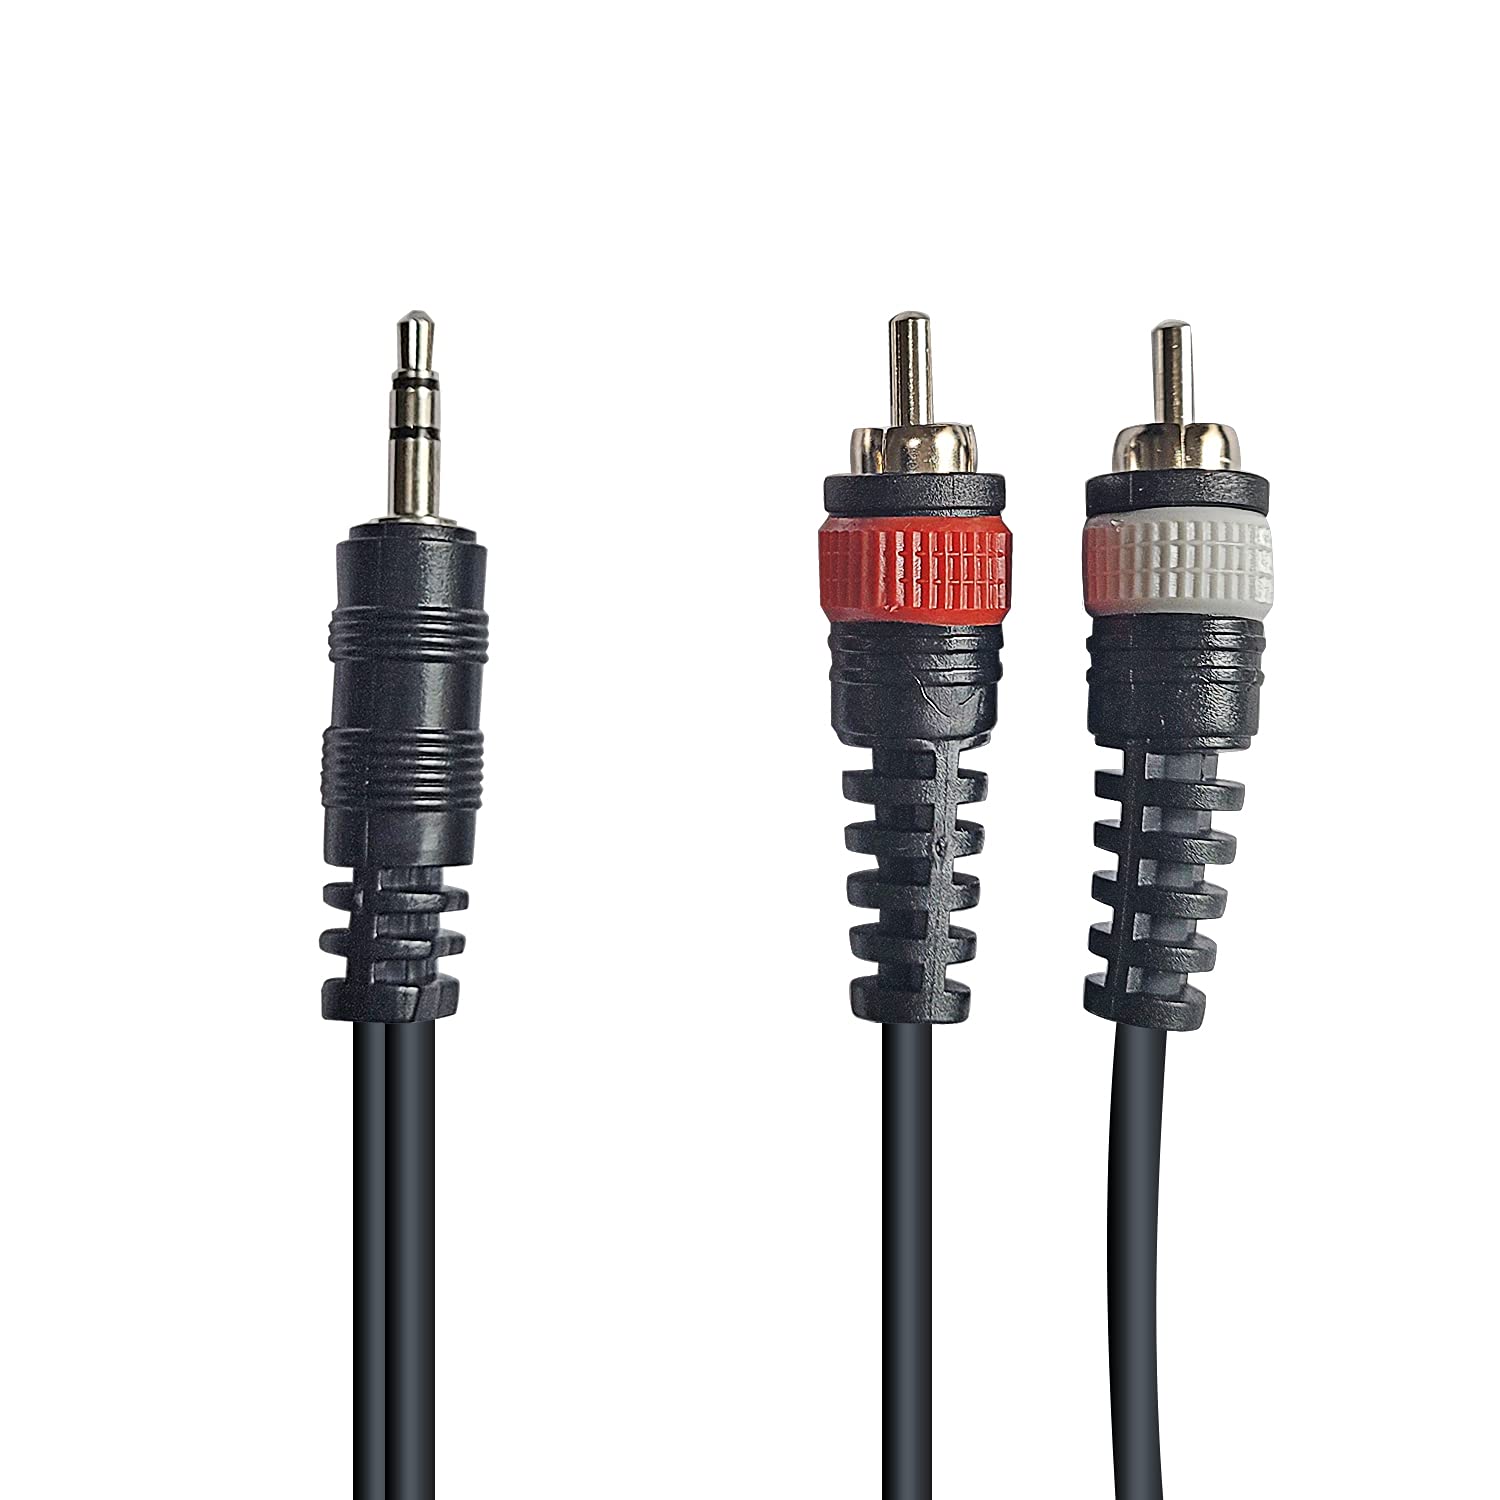 AxcessAbles TRS18-DRCA110 Audio Cable, Stereo 1/8 Inch to Dual RCA Adapter Cable -10ft  2PK